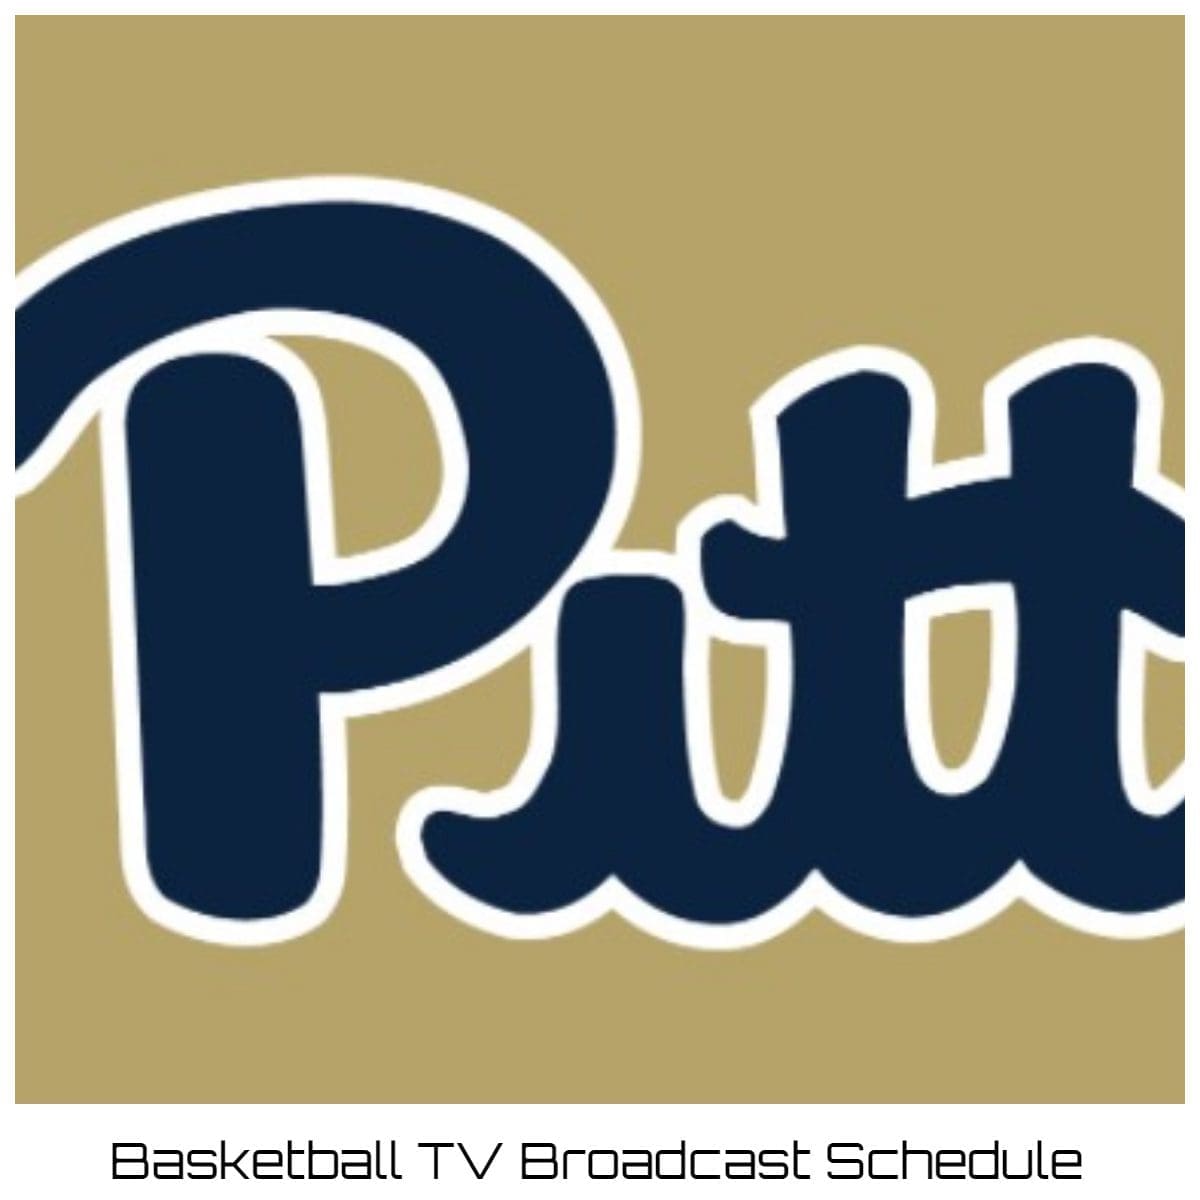 Pittsburgh Panthers Basketball TV Broadcast Schedule